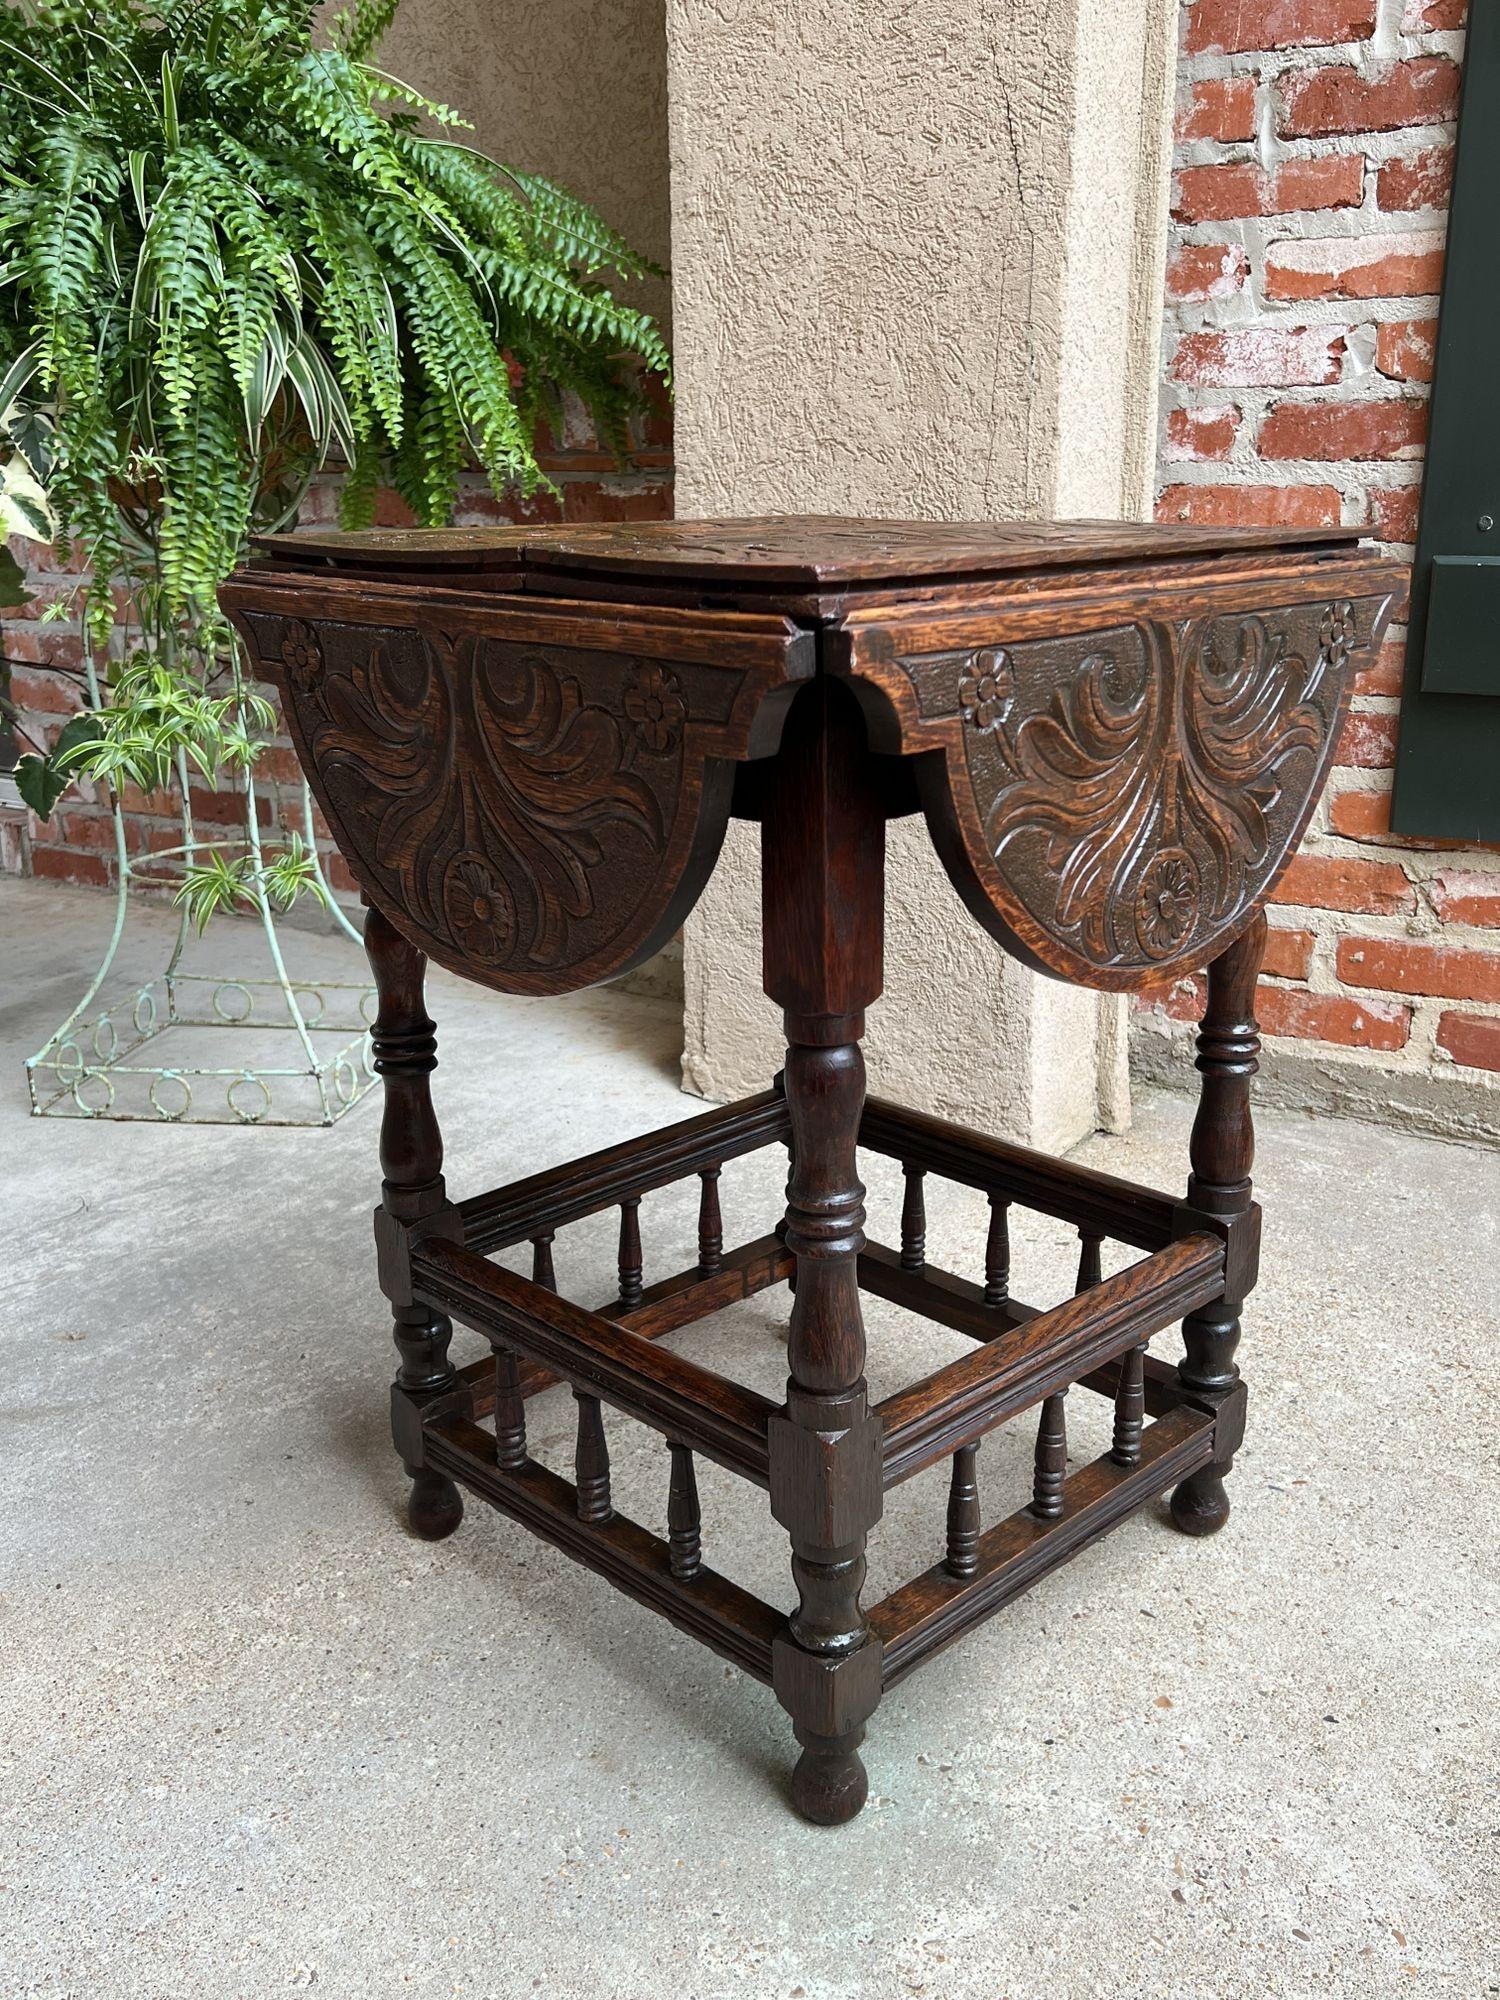 Antique English carved oak side hall table petite drop leaf tea wine table.
 
Direct from England, a heavily carved antique side table, in a versatile petite size. Four independent drop leaves, all scalloped edge with fully carved tops.
Turned